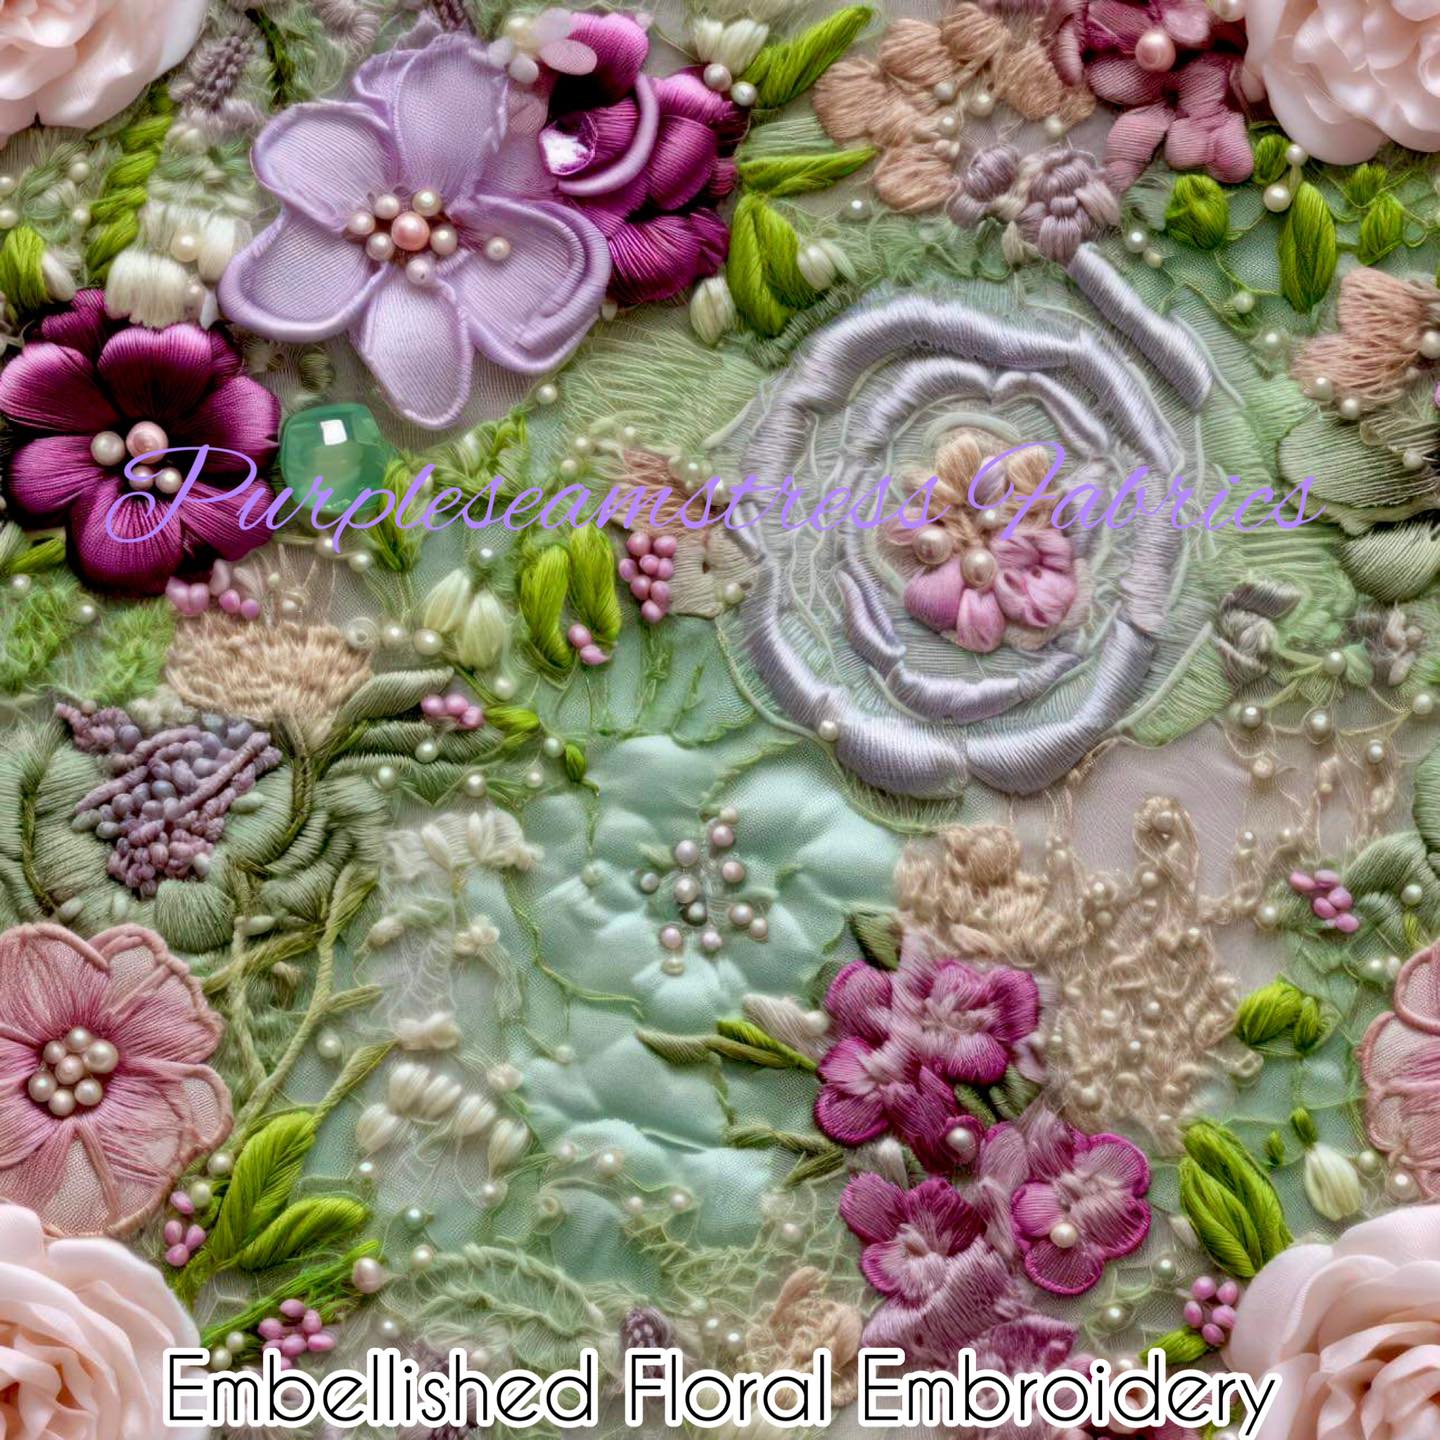 Embellished Floral Embroidery – Purpleseamstress Fabric